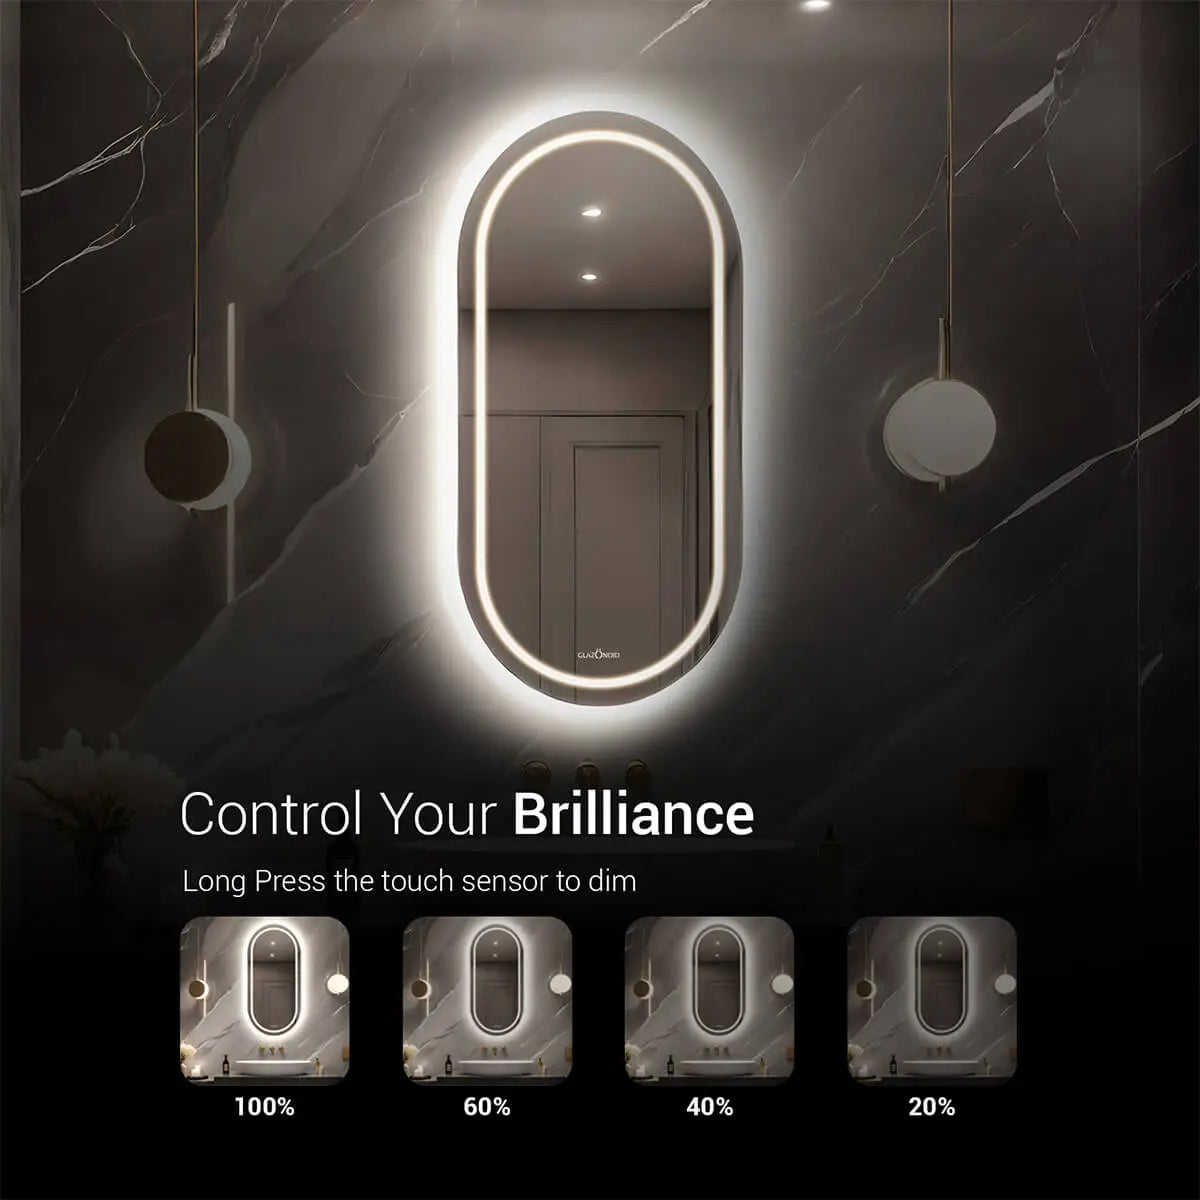 A modern bathroom mirror with a built-in dimmable LED light. The light is controlled by a touch sensor on the mirror's surface. The text "Control Your Brilliance" is written below the mirror . Below that are four horizontal lines with incrementing percentages from 20% to 100% to indicate the light's brightness level.